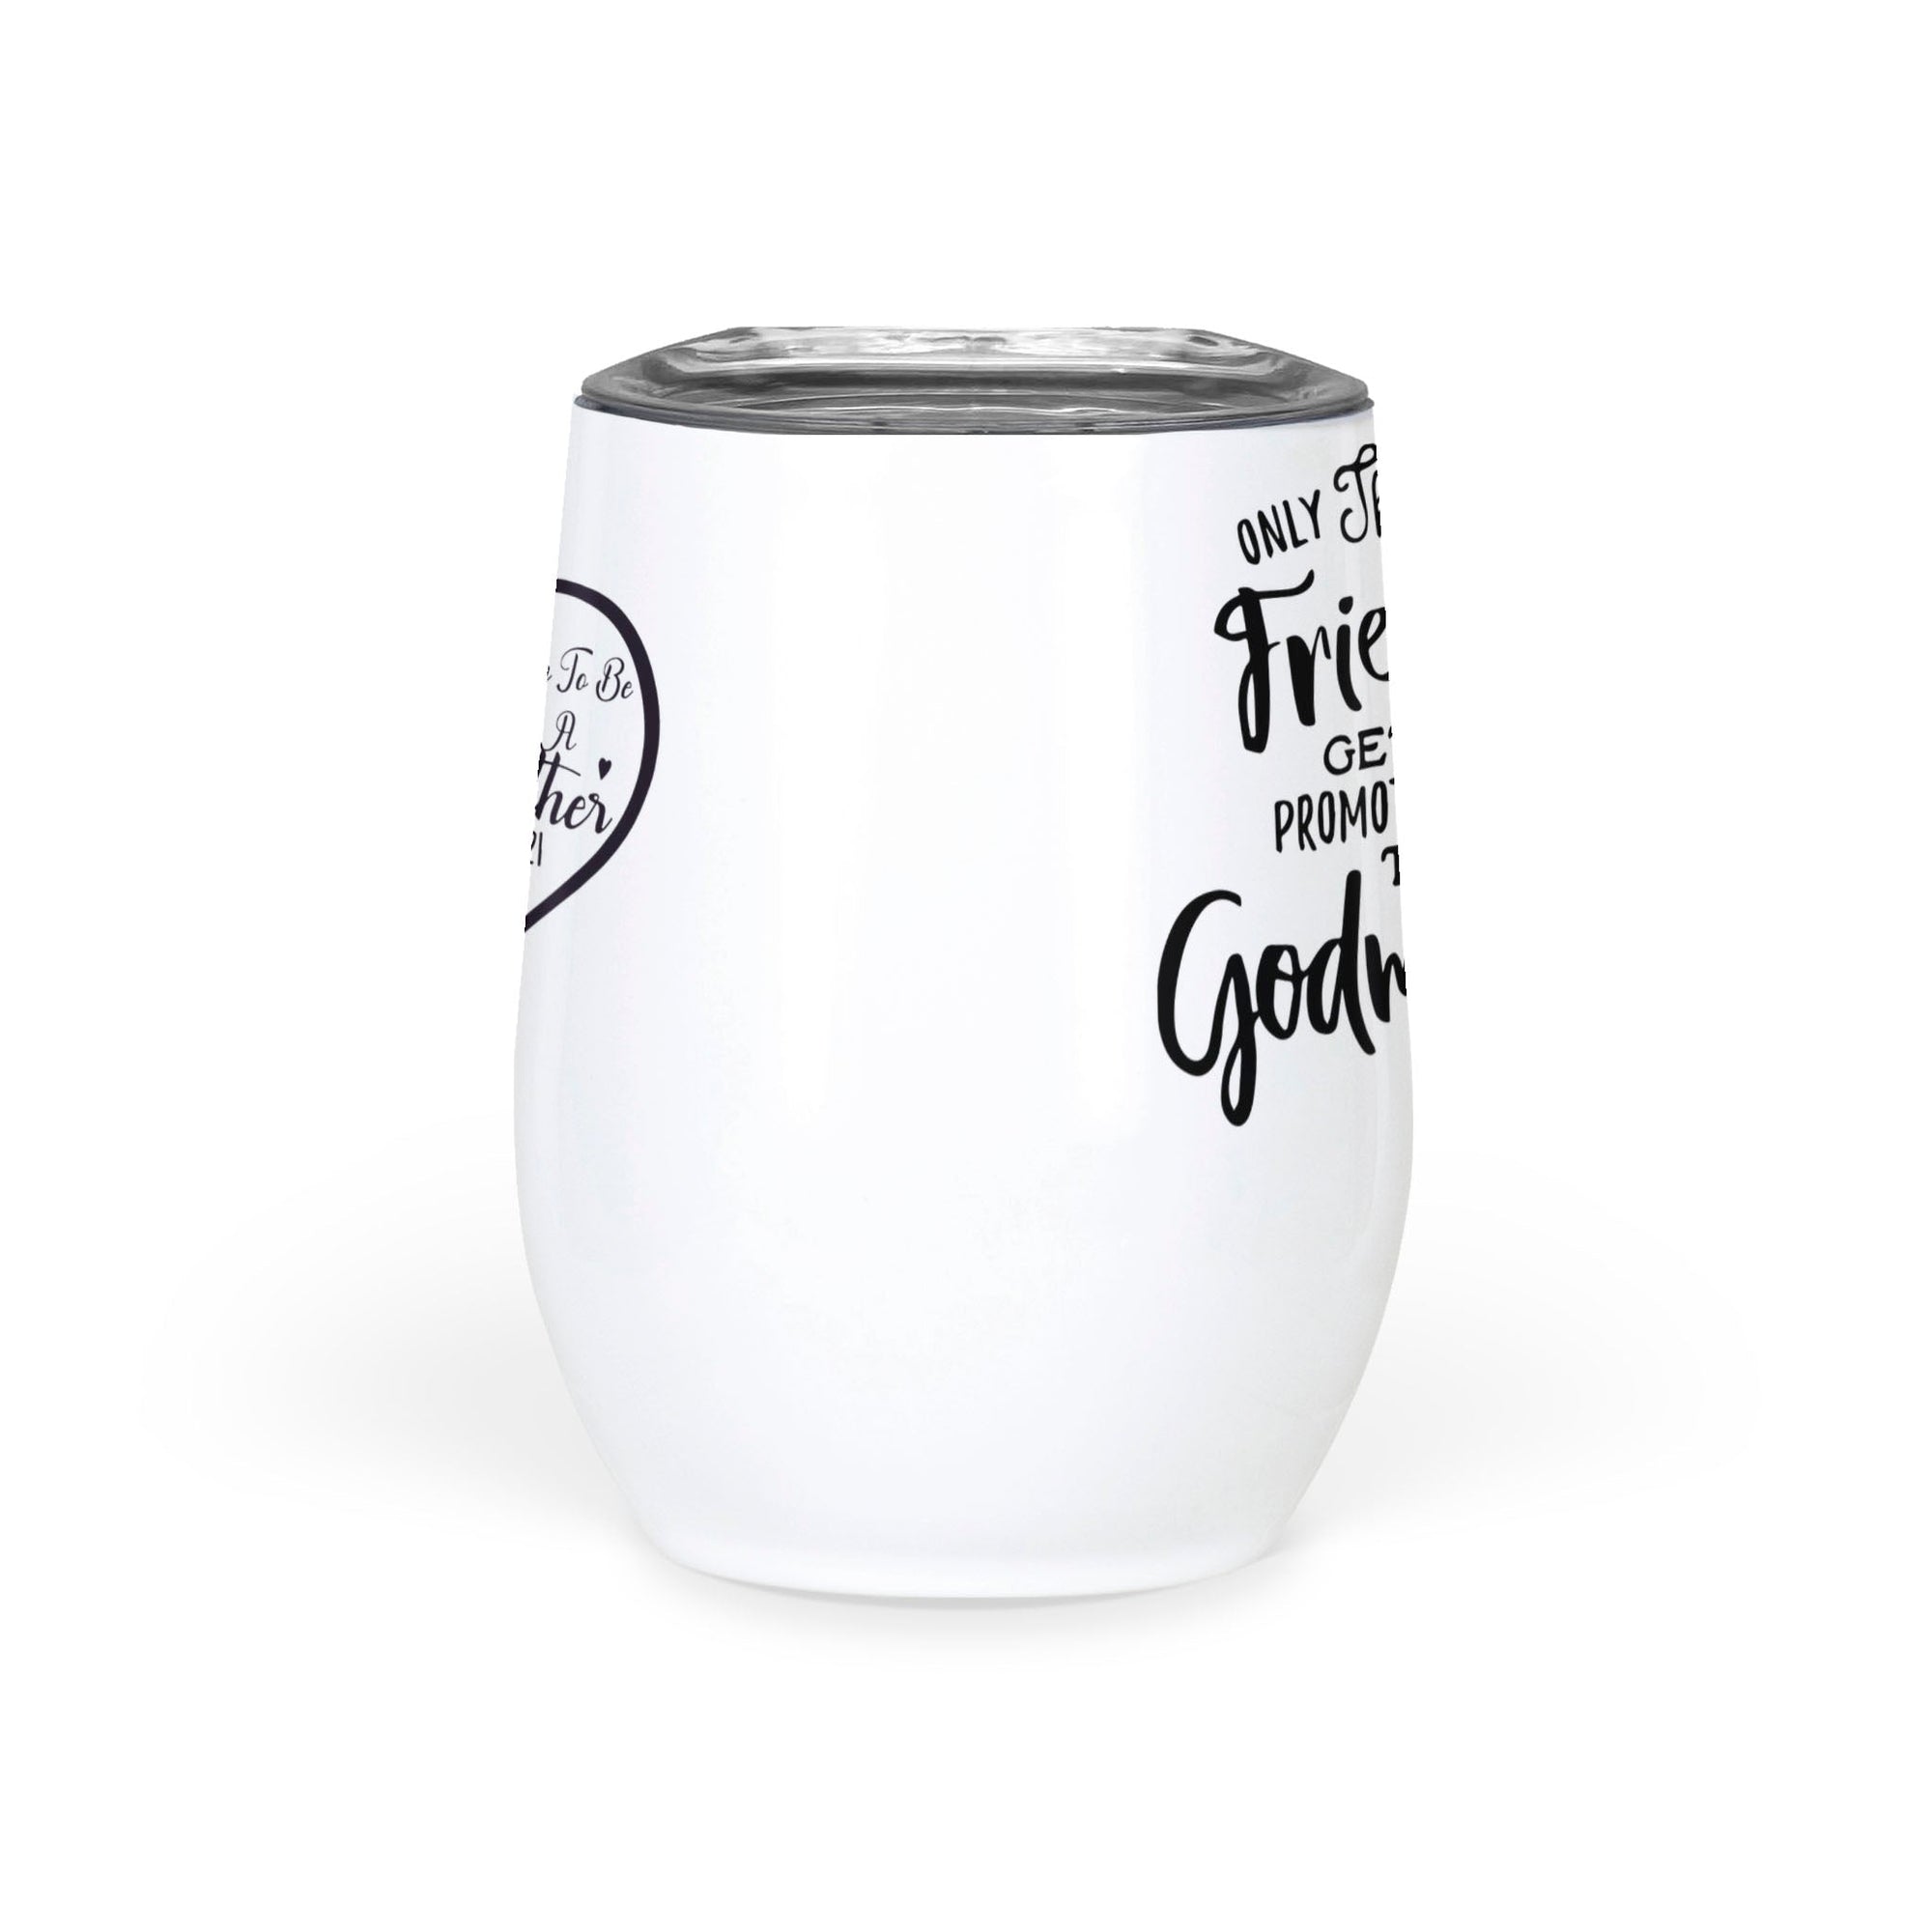 Godmother Gift. Best Friends Get Promoted to Godmother Wine Tumbler. Godmom to Be. Godmother Proposal. Best Friend Present Wine Tumbler